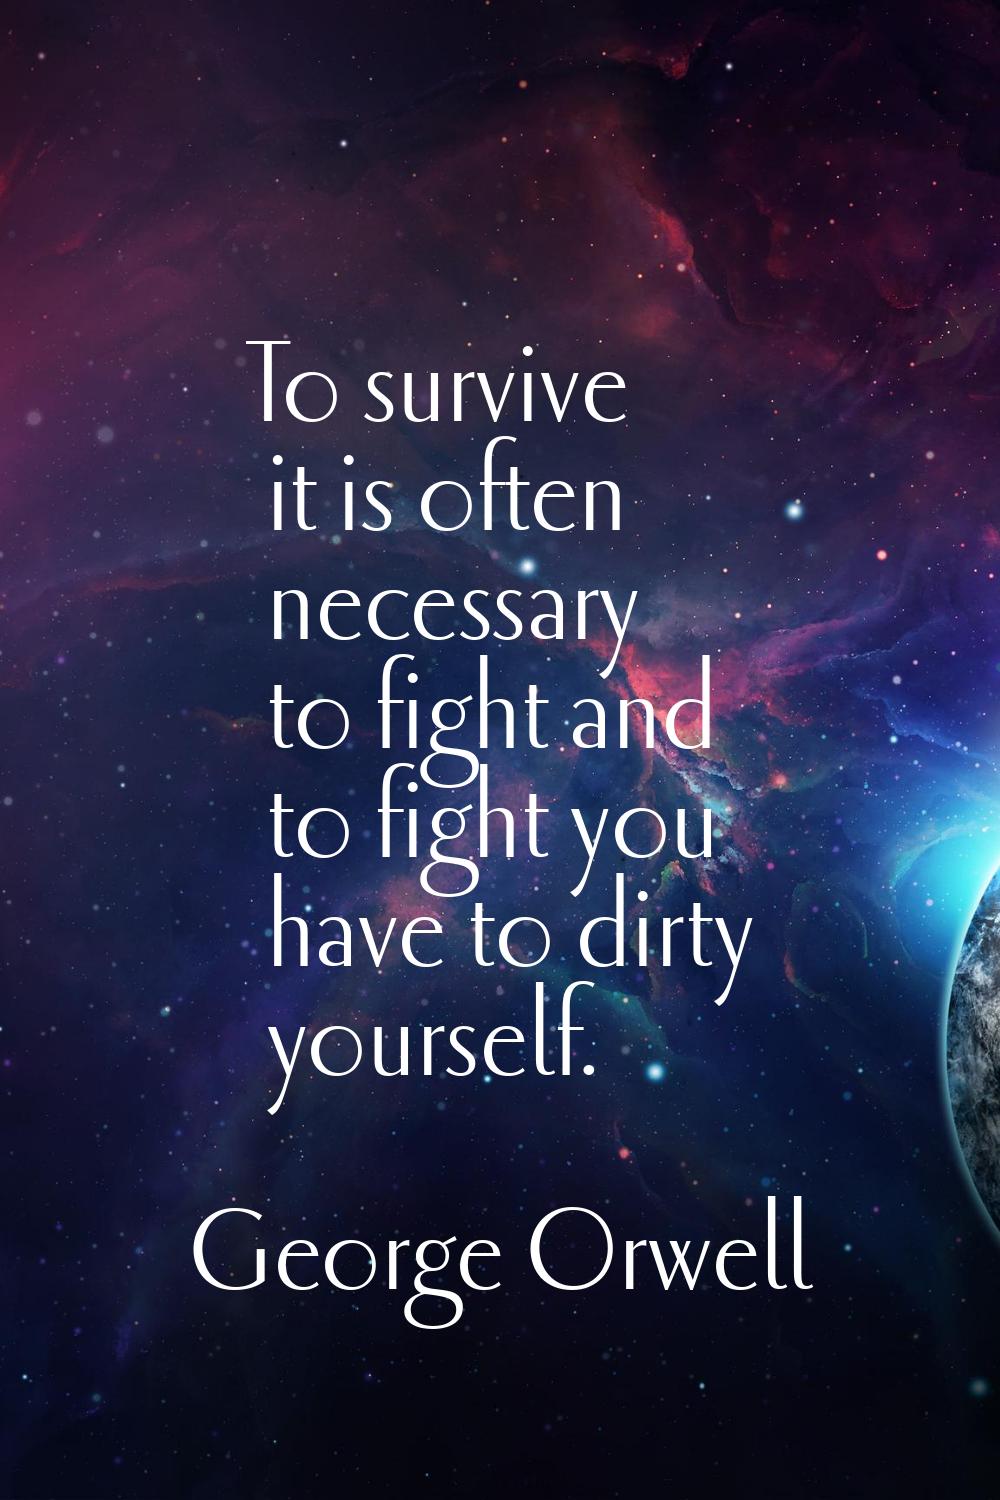 To survive it is often necessary to fight and to fight you have to dirty yourself.